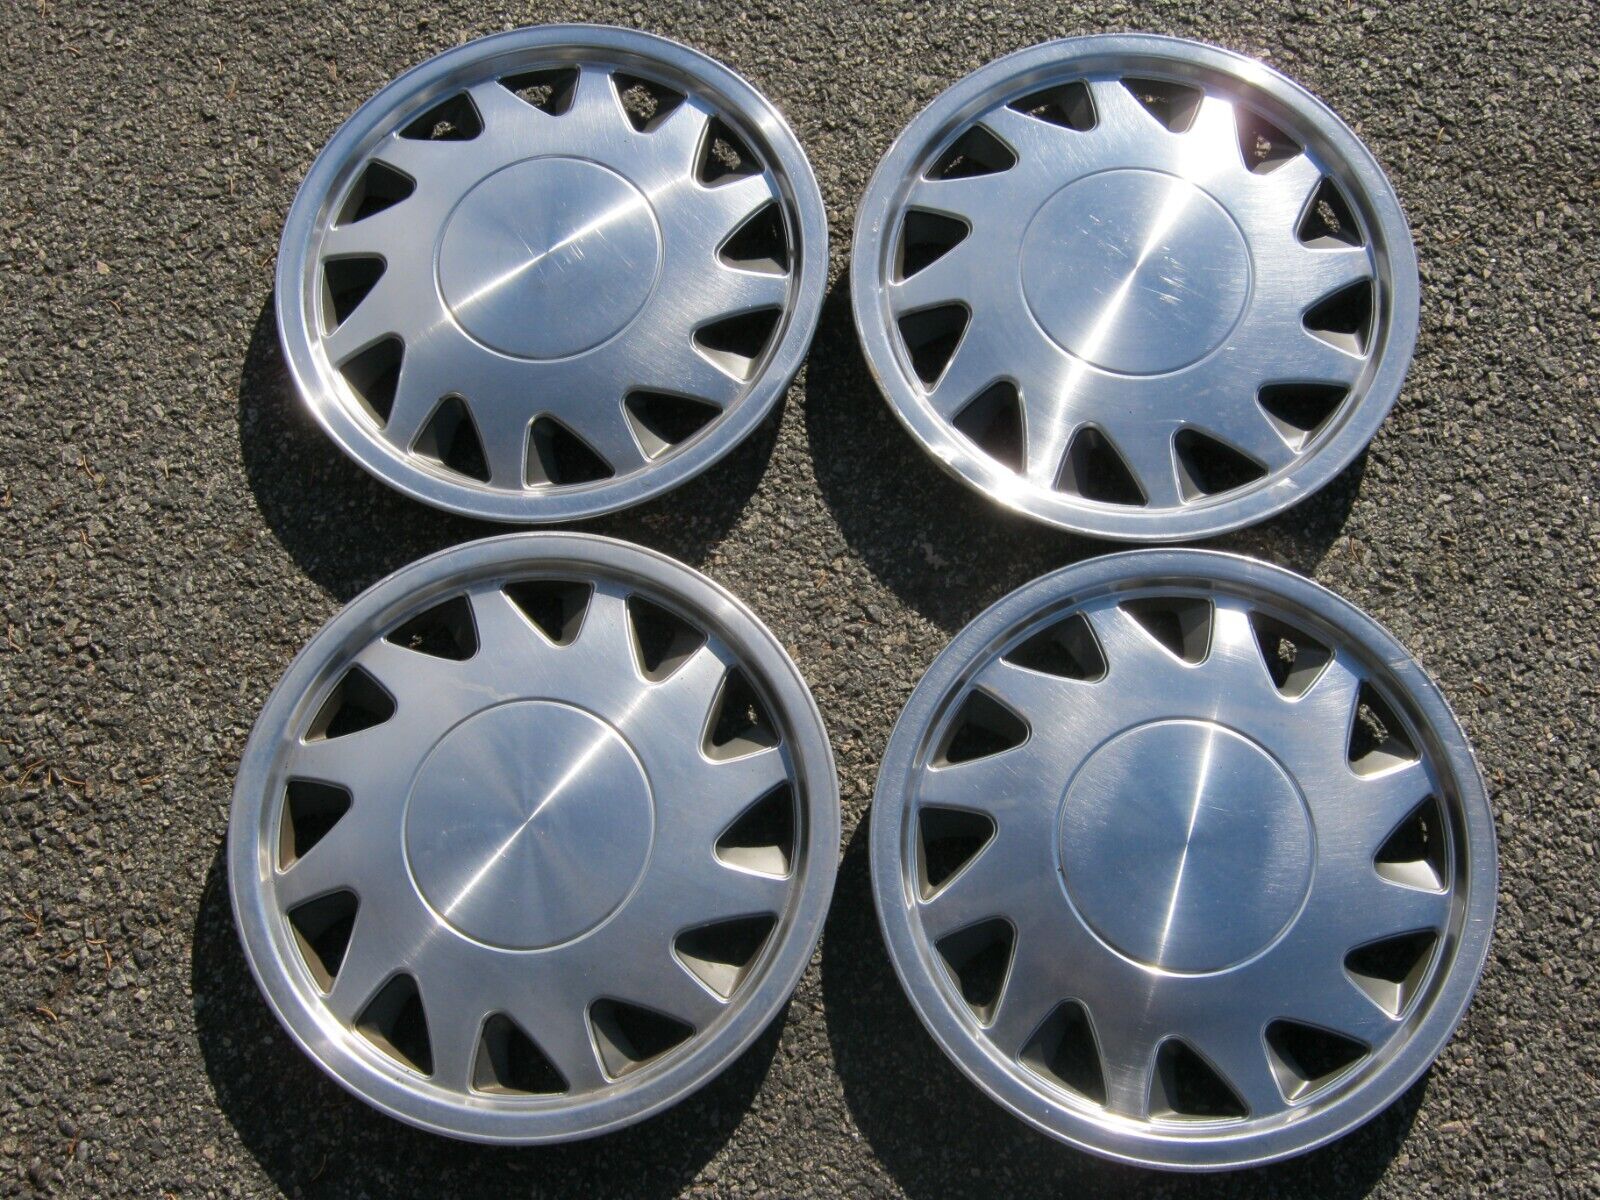 Factory original 1988 to 1990 Plymouth Sundance 14 inch hubcaps wheel covers